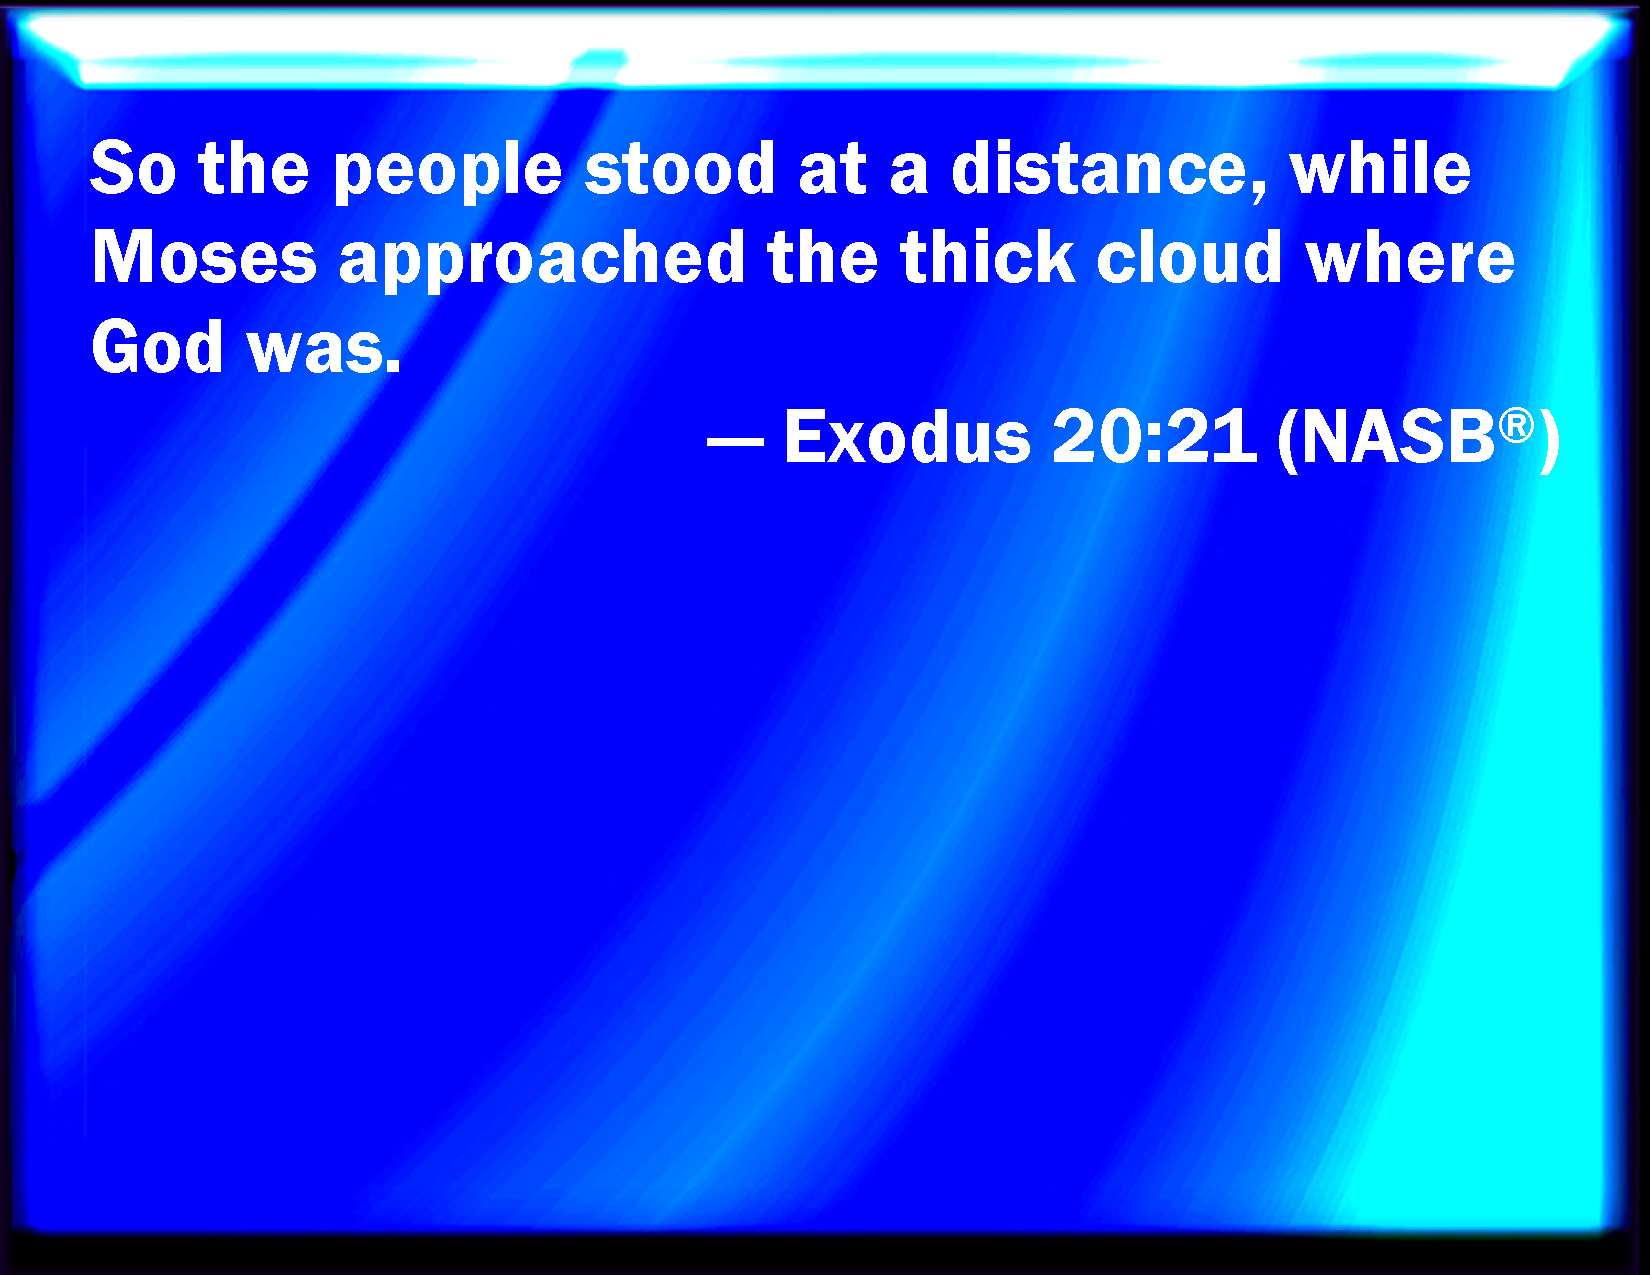 Exodus 20:21 And the people stood afar off, and Moses drew near to the